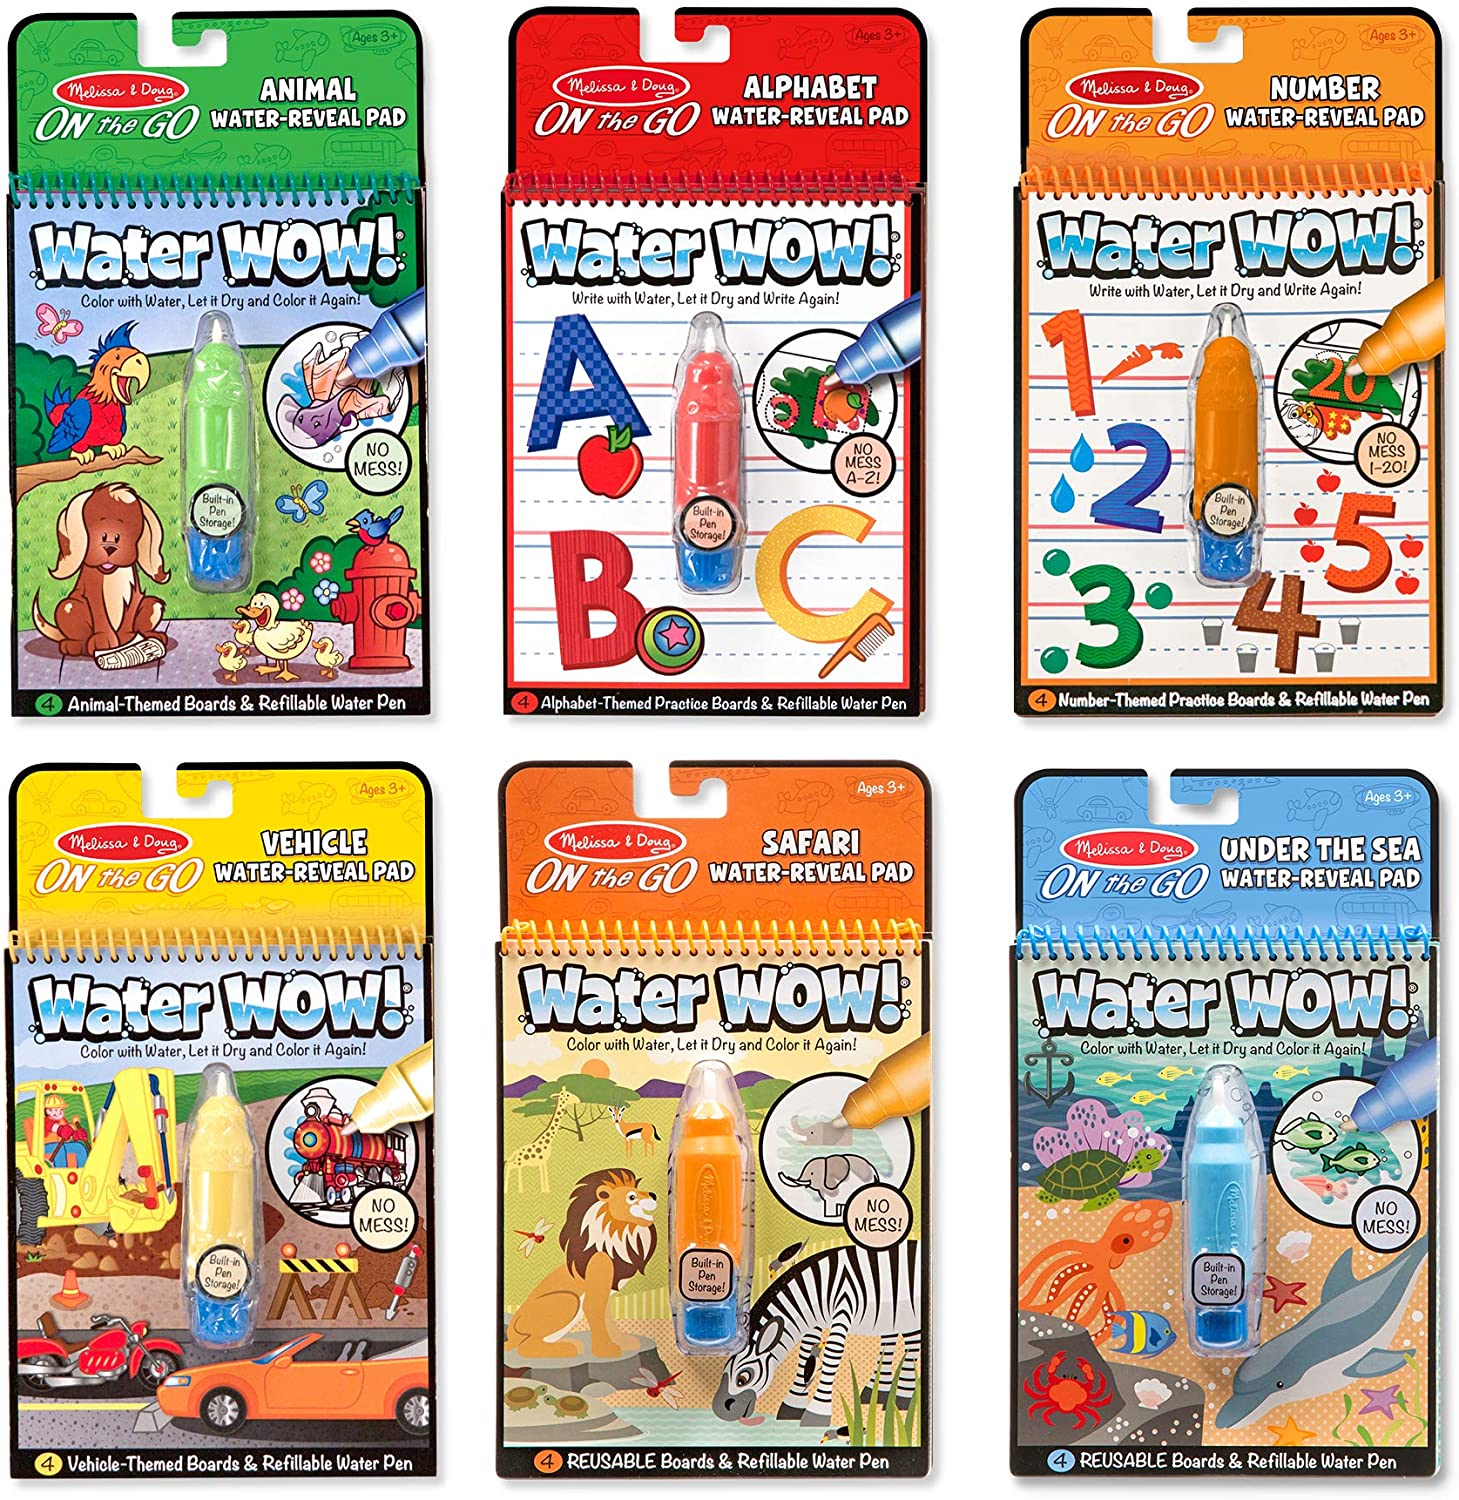 Lowest Price: Melissa & Doug Water Wow! - Water Reveal Pad